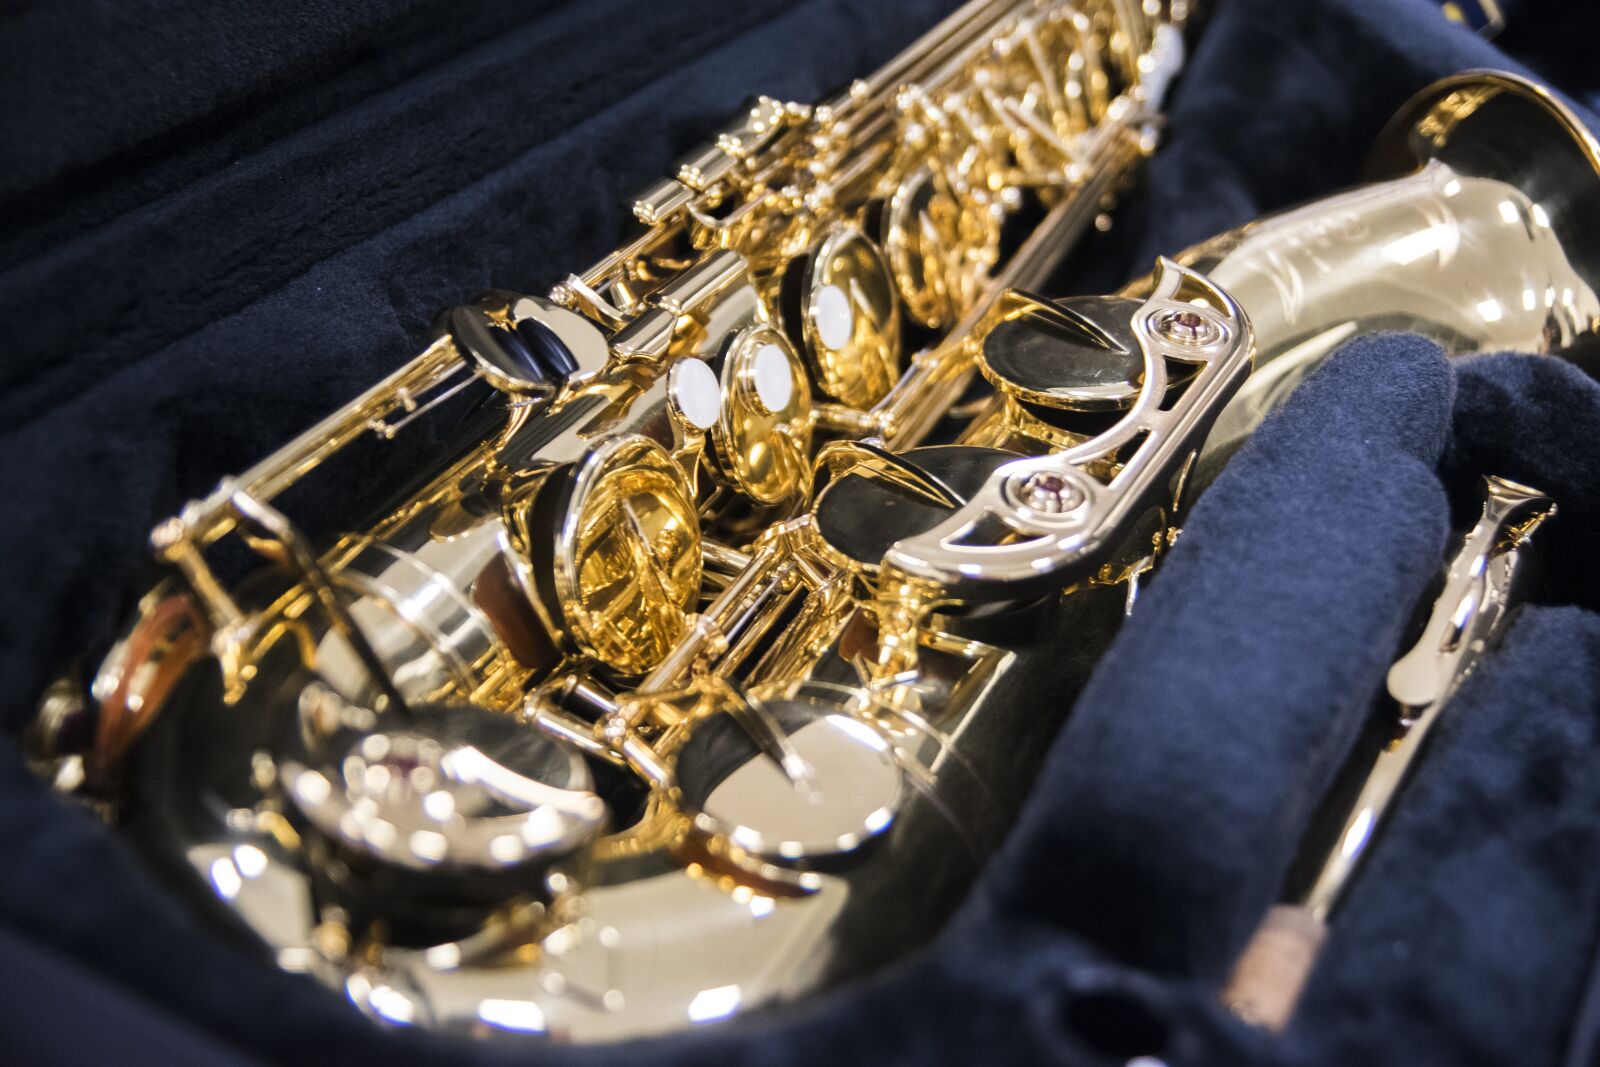 Tamron SP AF 17-50mm F2.8 XR Di II LD Aspherical (IF) sample photo. Instruments, craft, saxophone photography